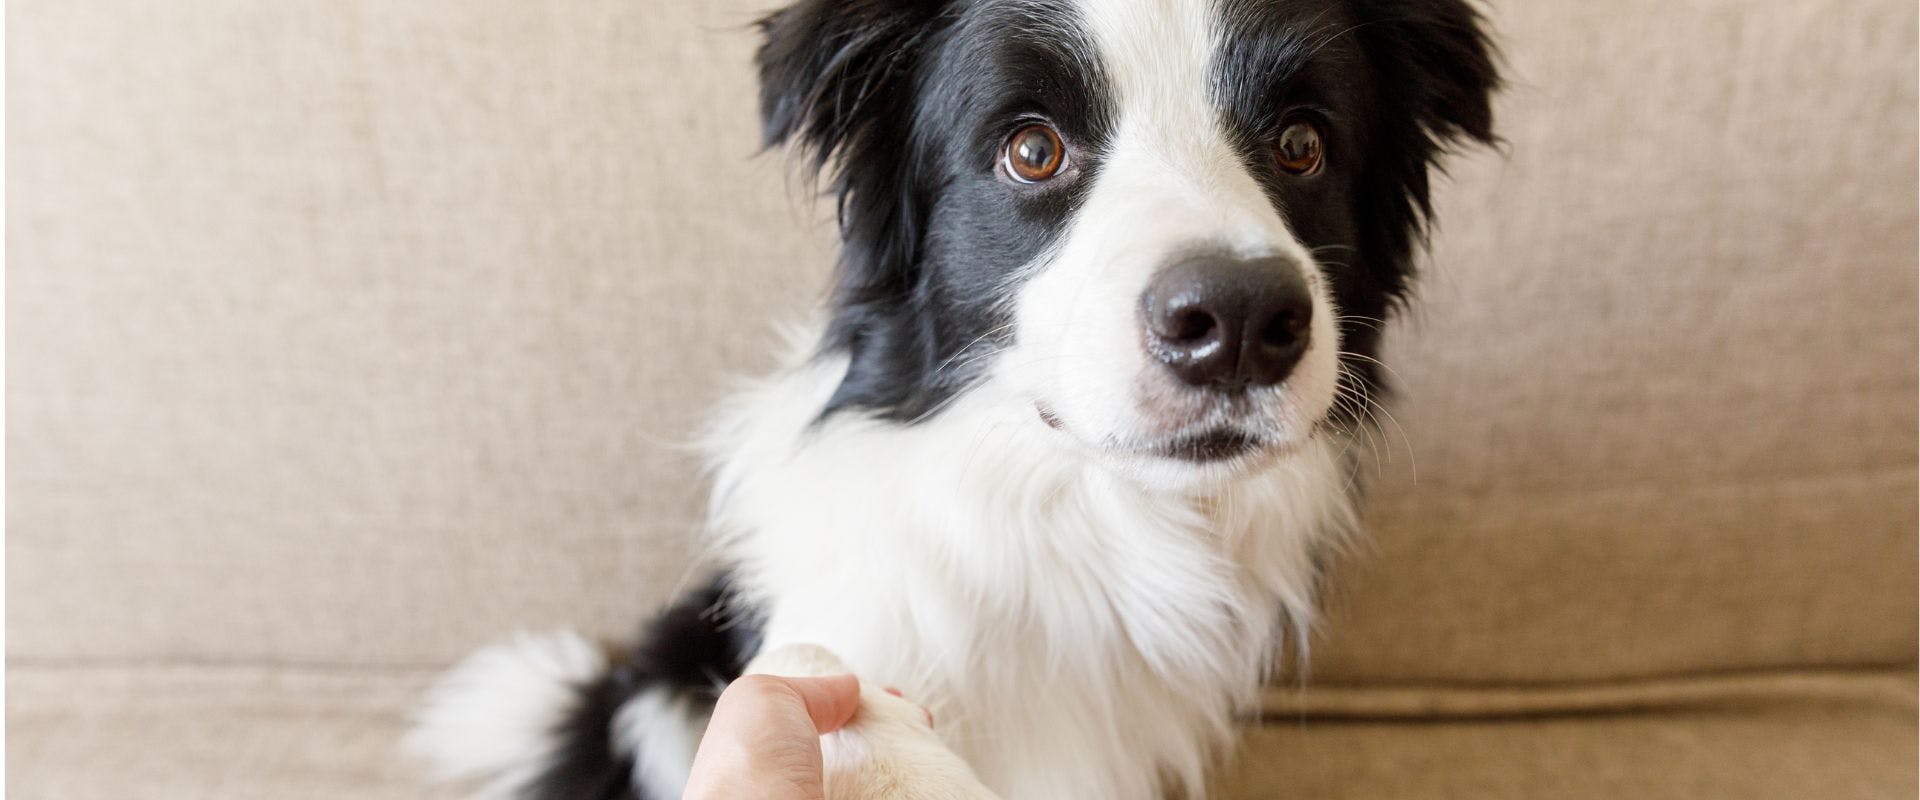 Border Collie doing paw trick